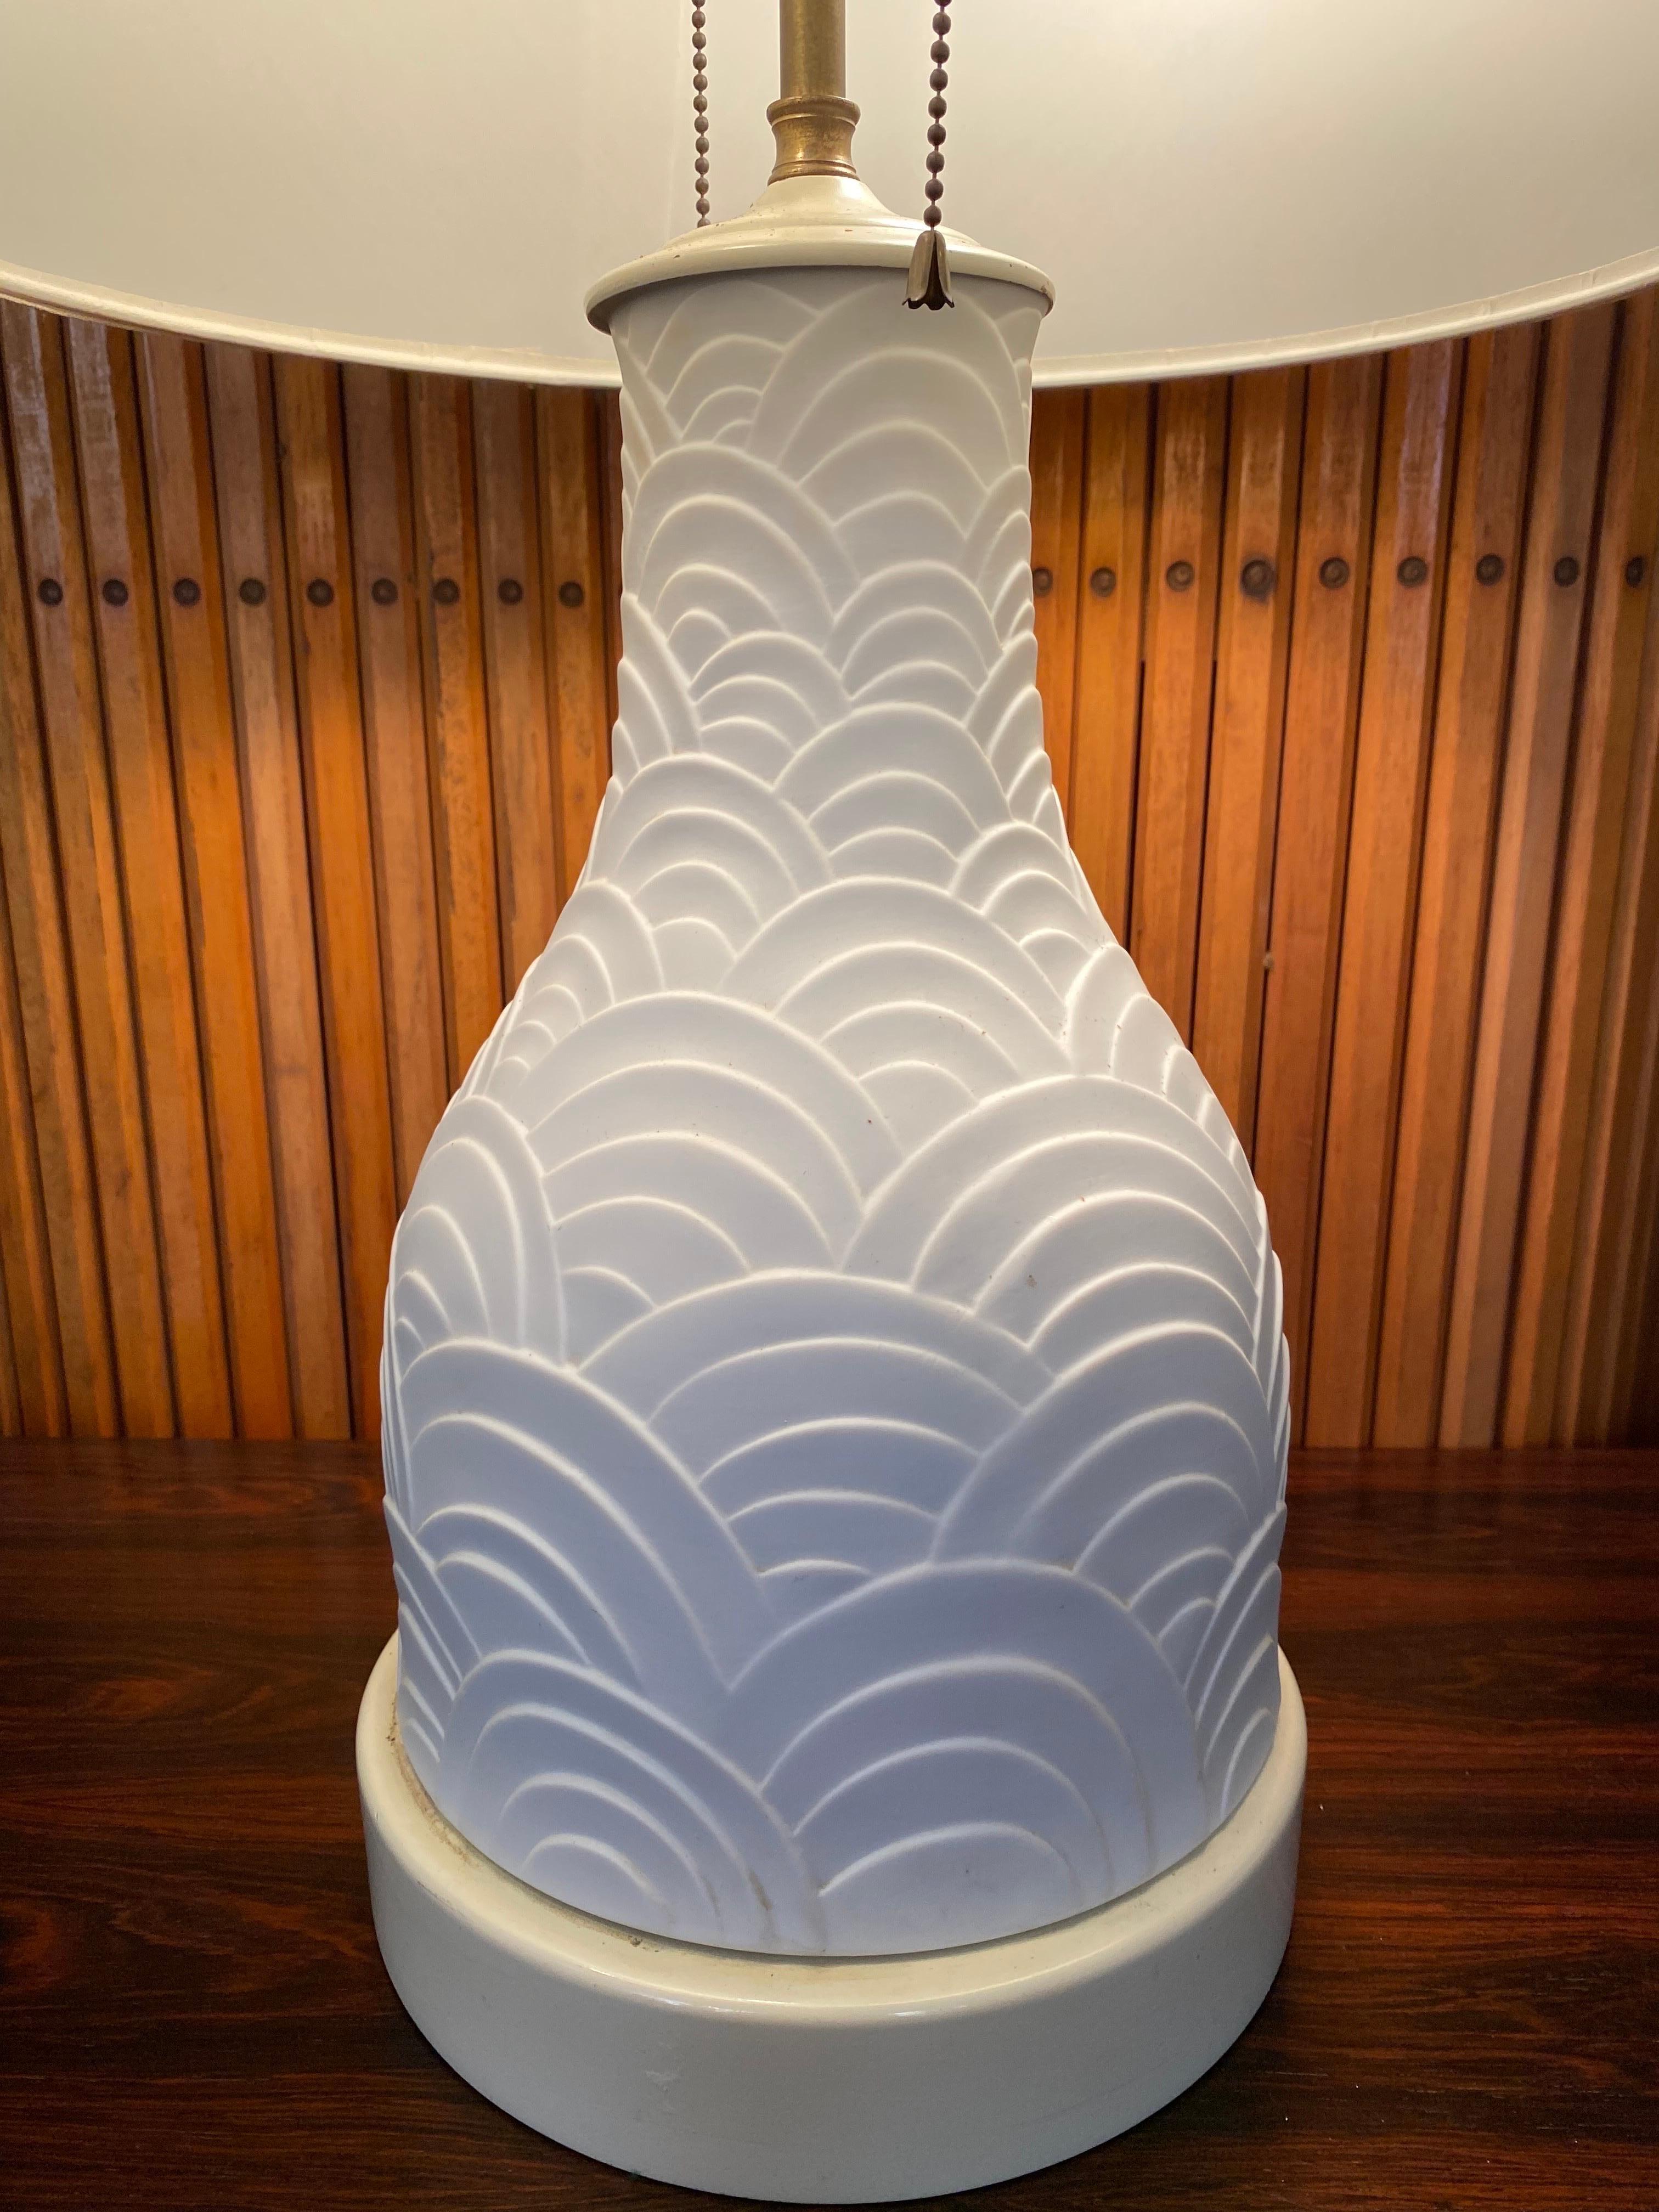 Heinrich German porcelain fish scale table lamp. Handsome design that sits on a raised round wood base. Two sockets control the light with pull chains. In very nice shape! Signed to underside.